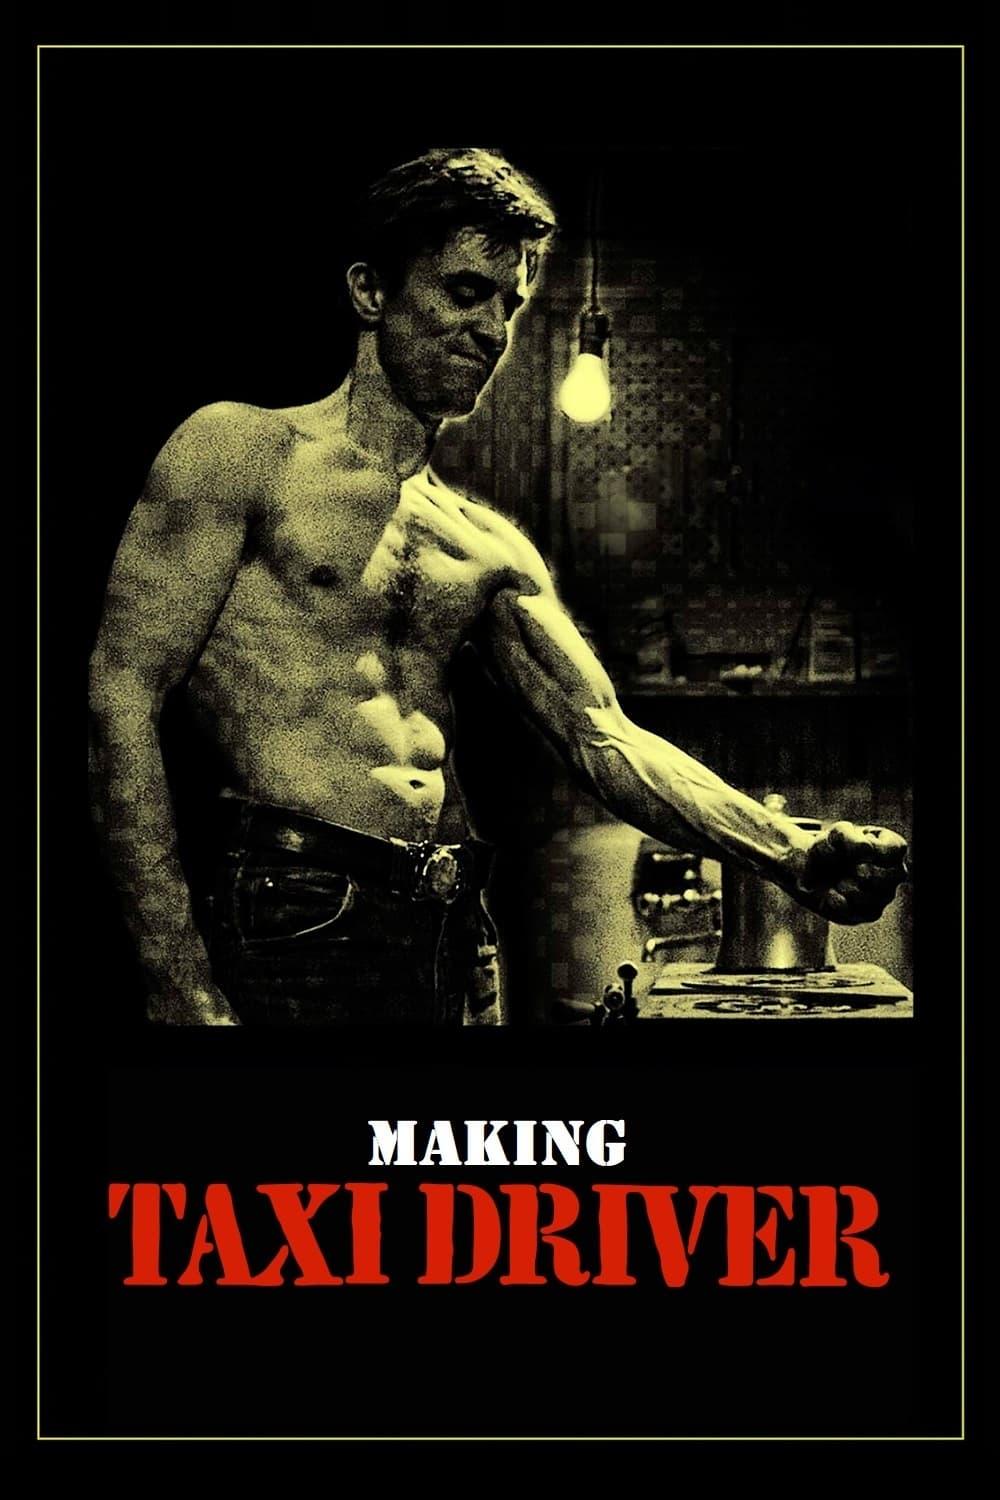 Making 'Taxi Driver' poster